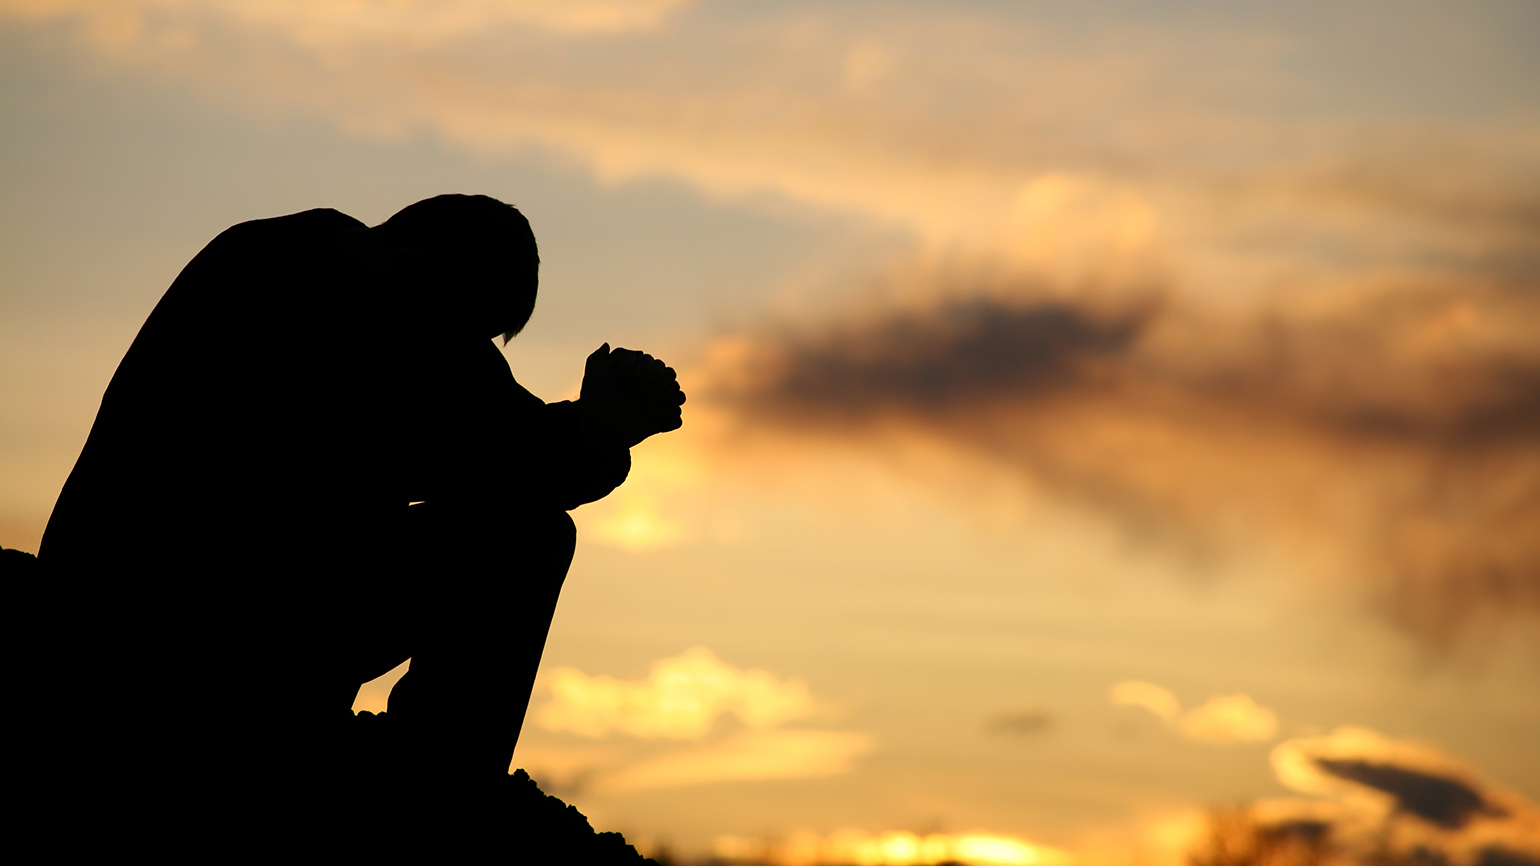 Royalty-Free Stock Photo: Man praying and building a resilient faith at sunset.